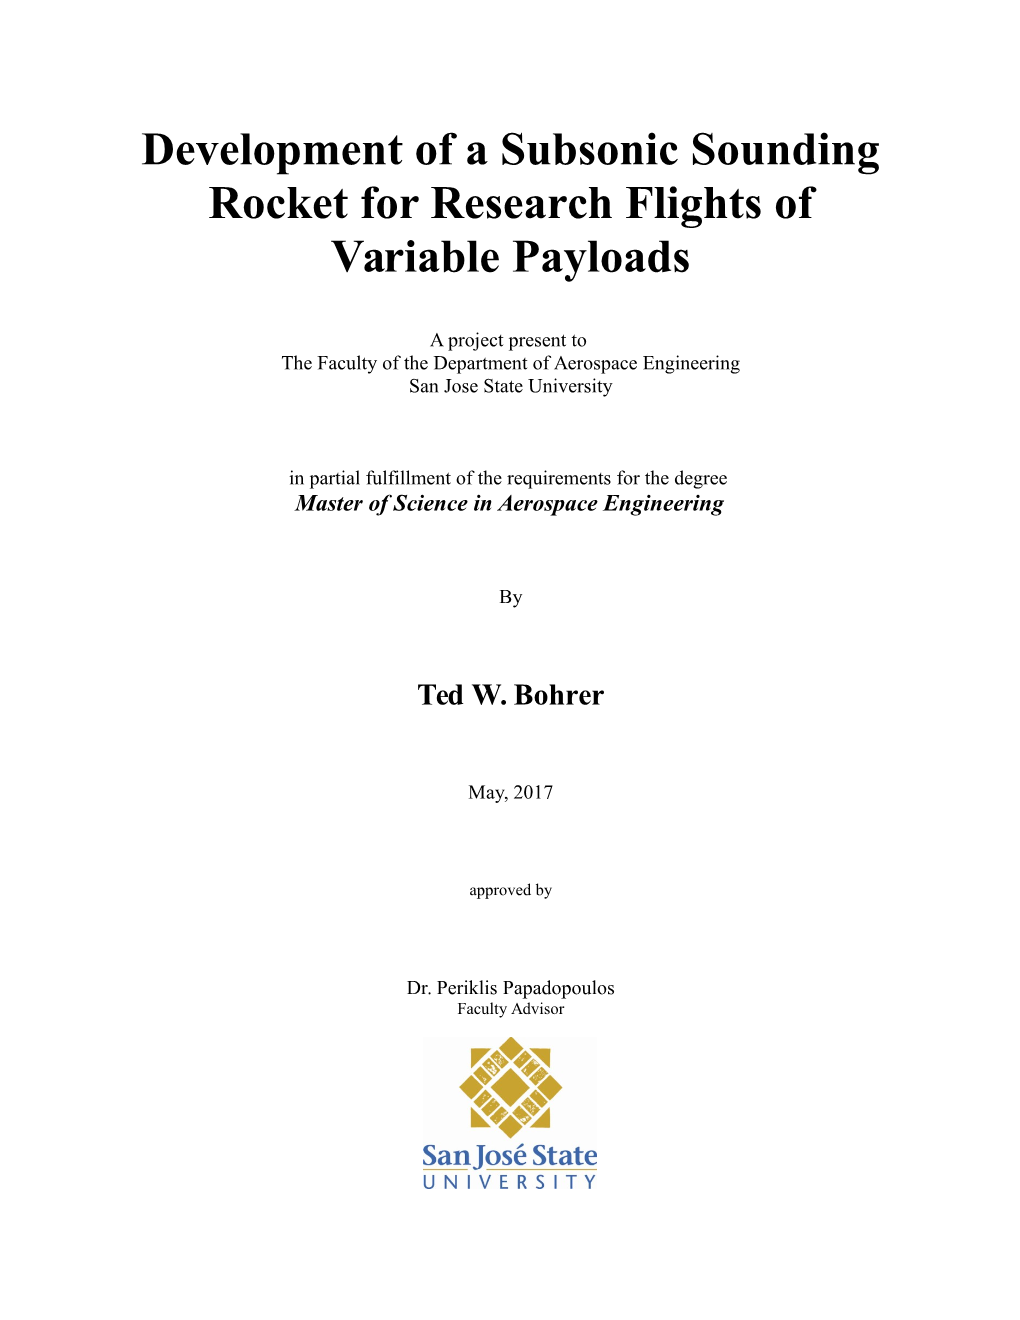 Development of a Subsonic Sounding Rocket for Research Flights of Variable Payloads